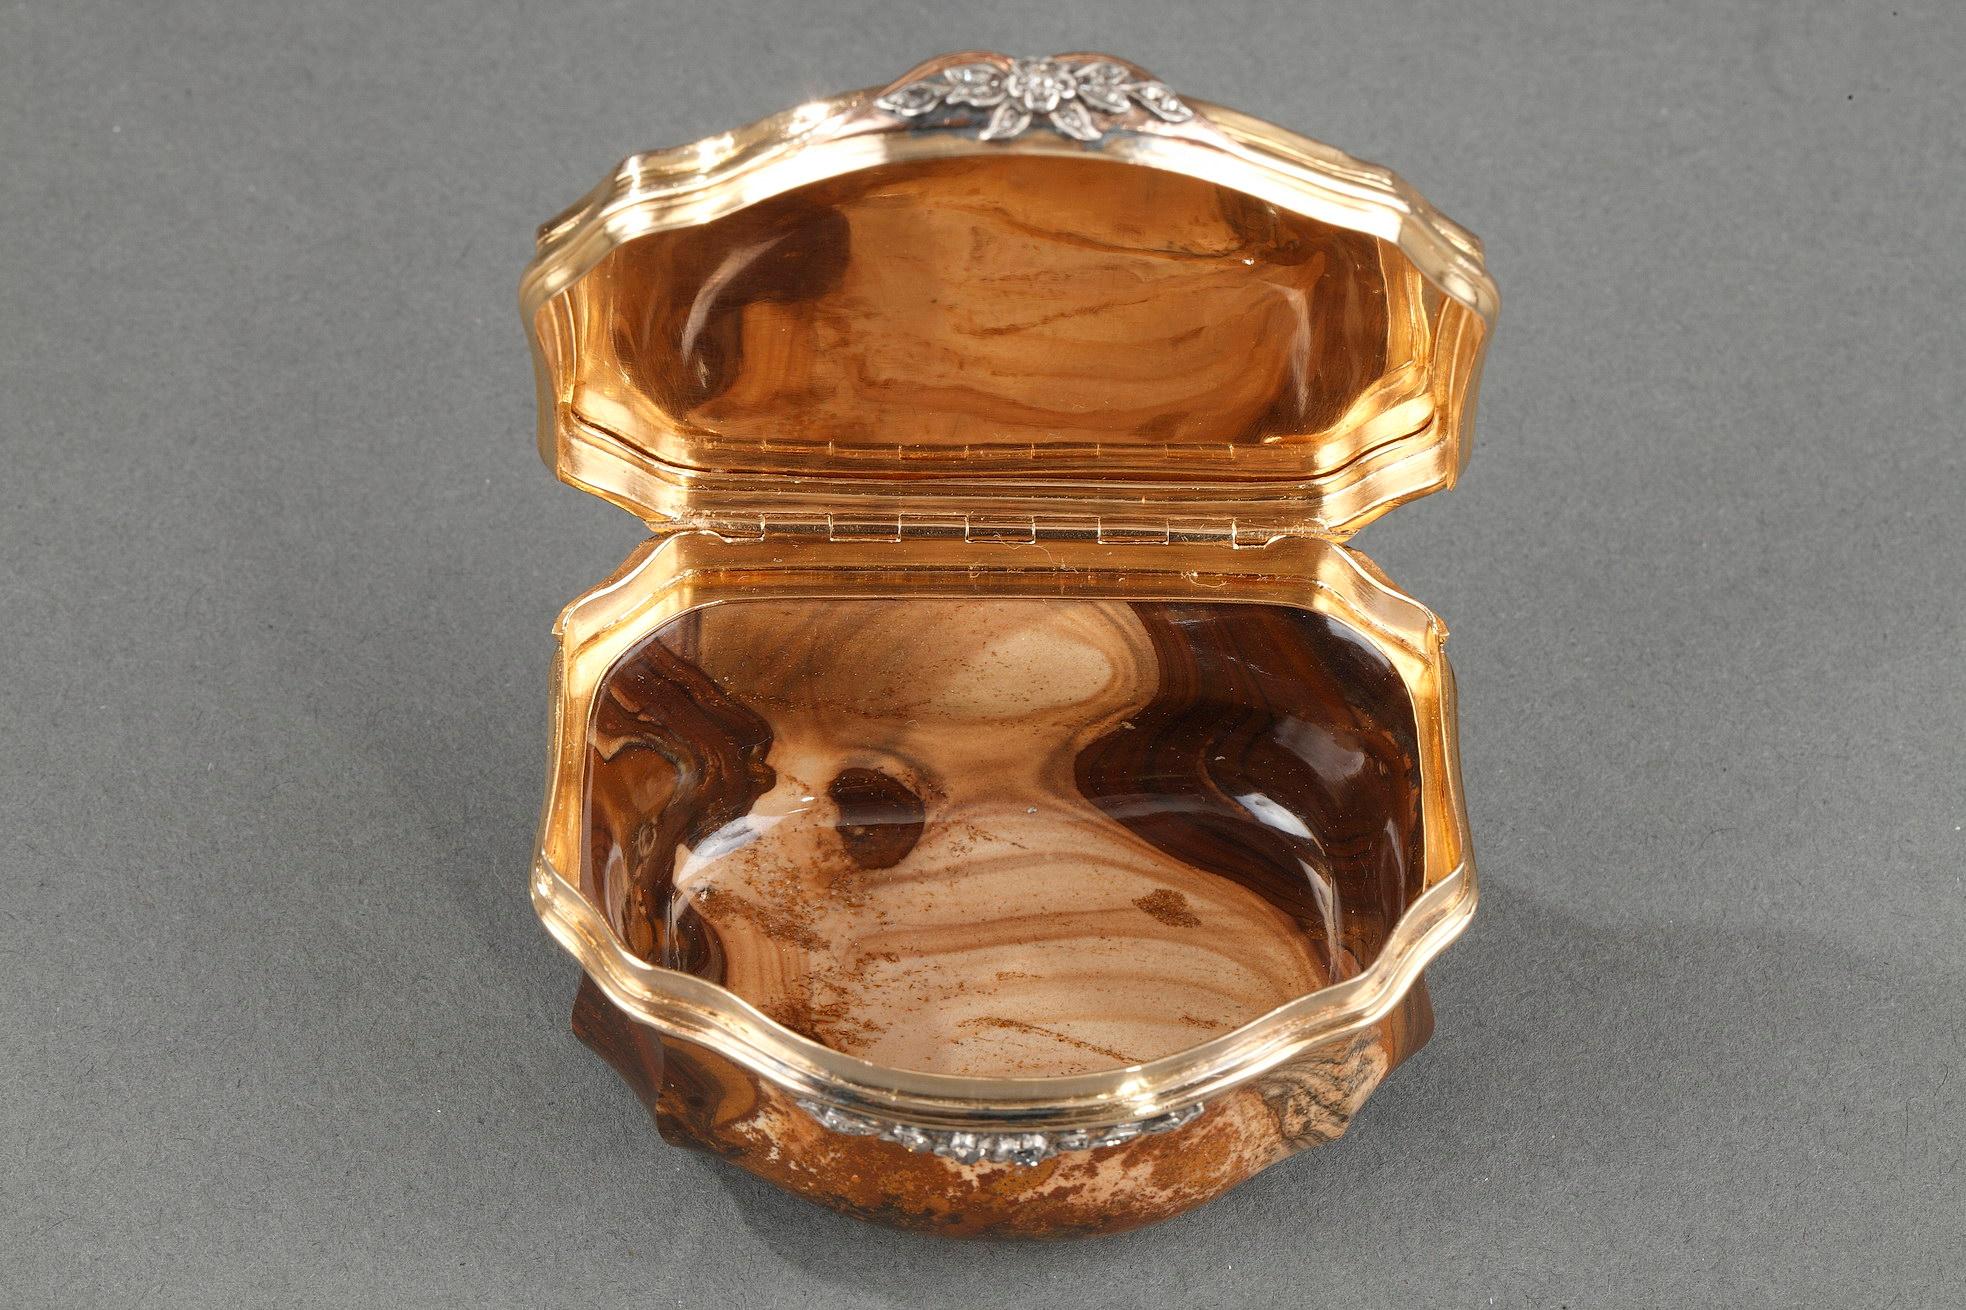 Gold, Agate and Gemstones Snuffbox, 18th Century 10